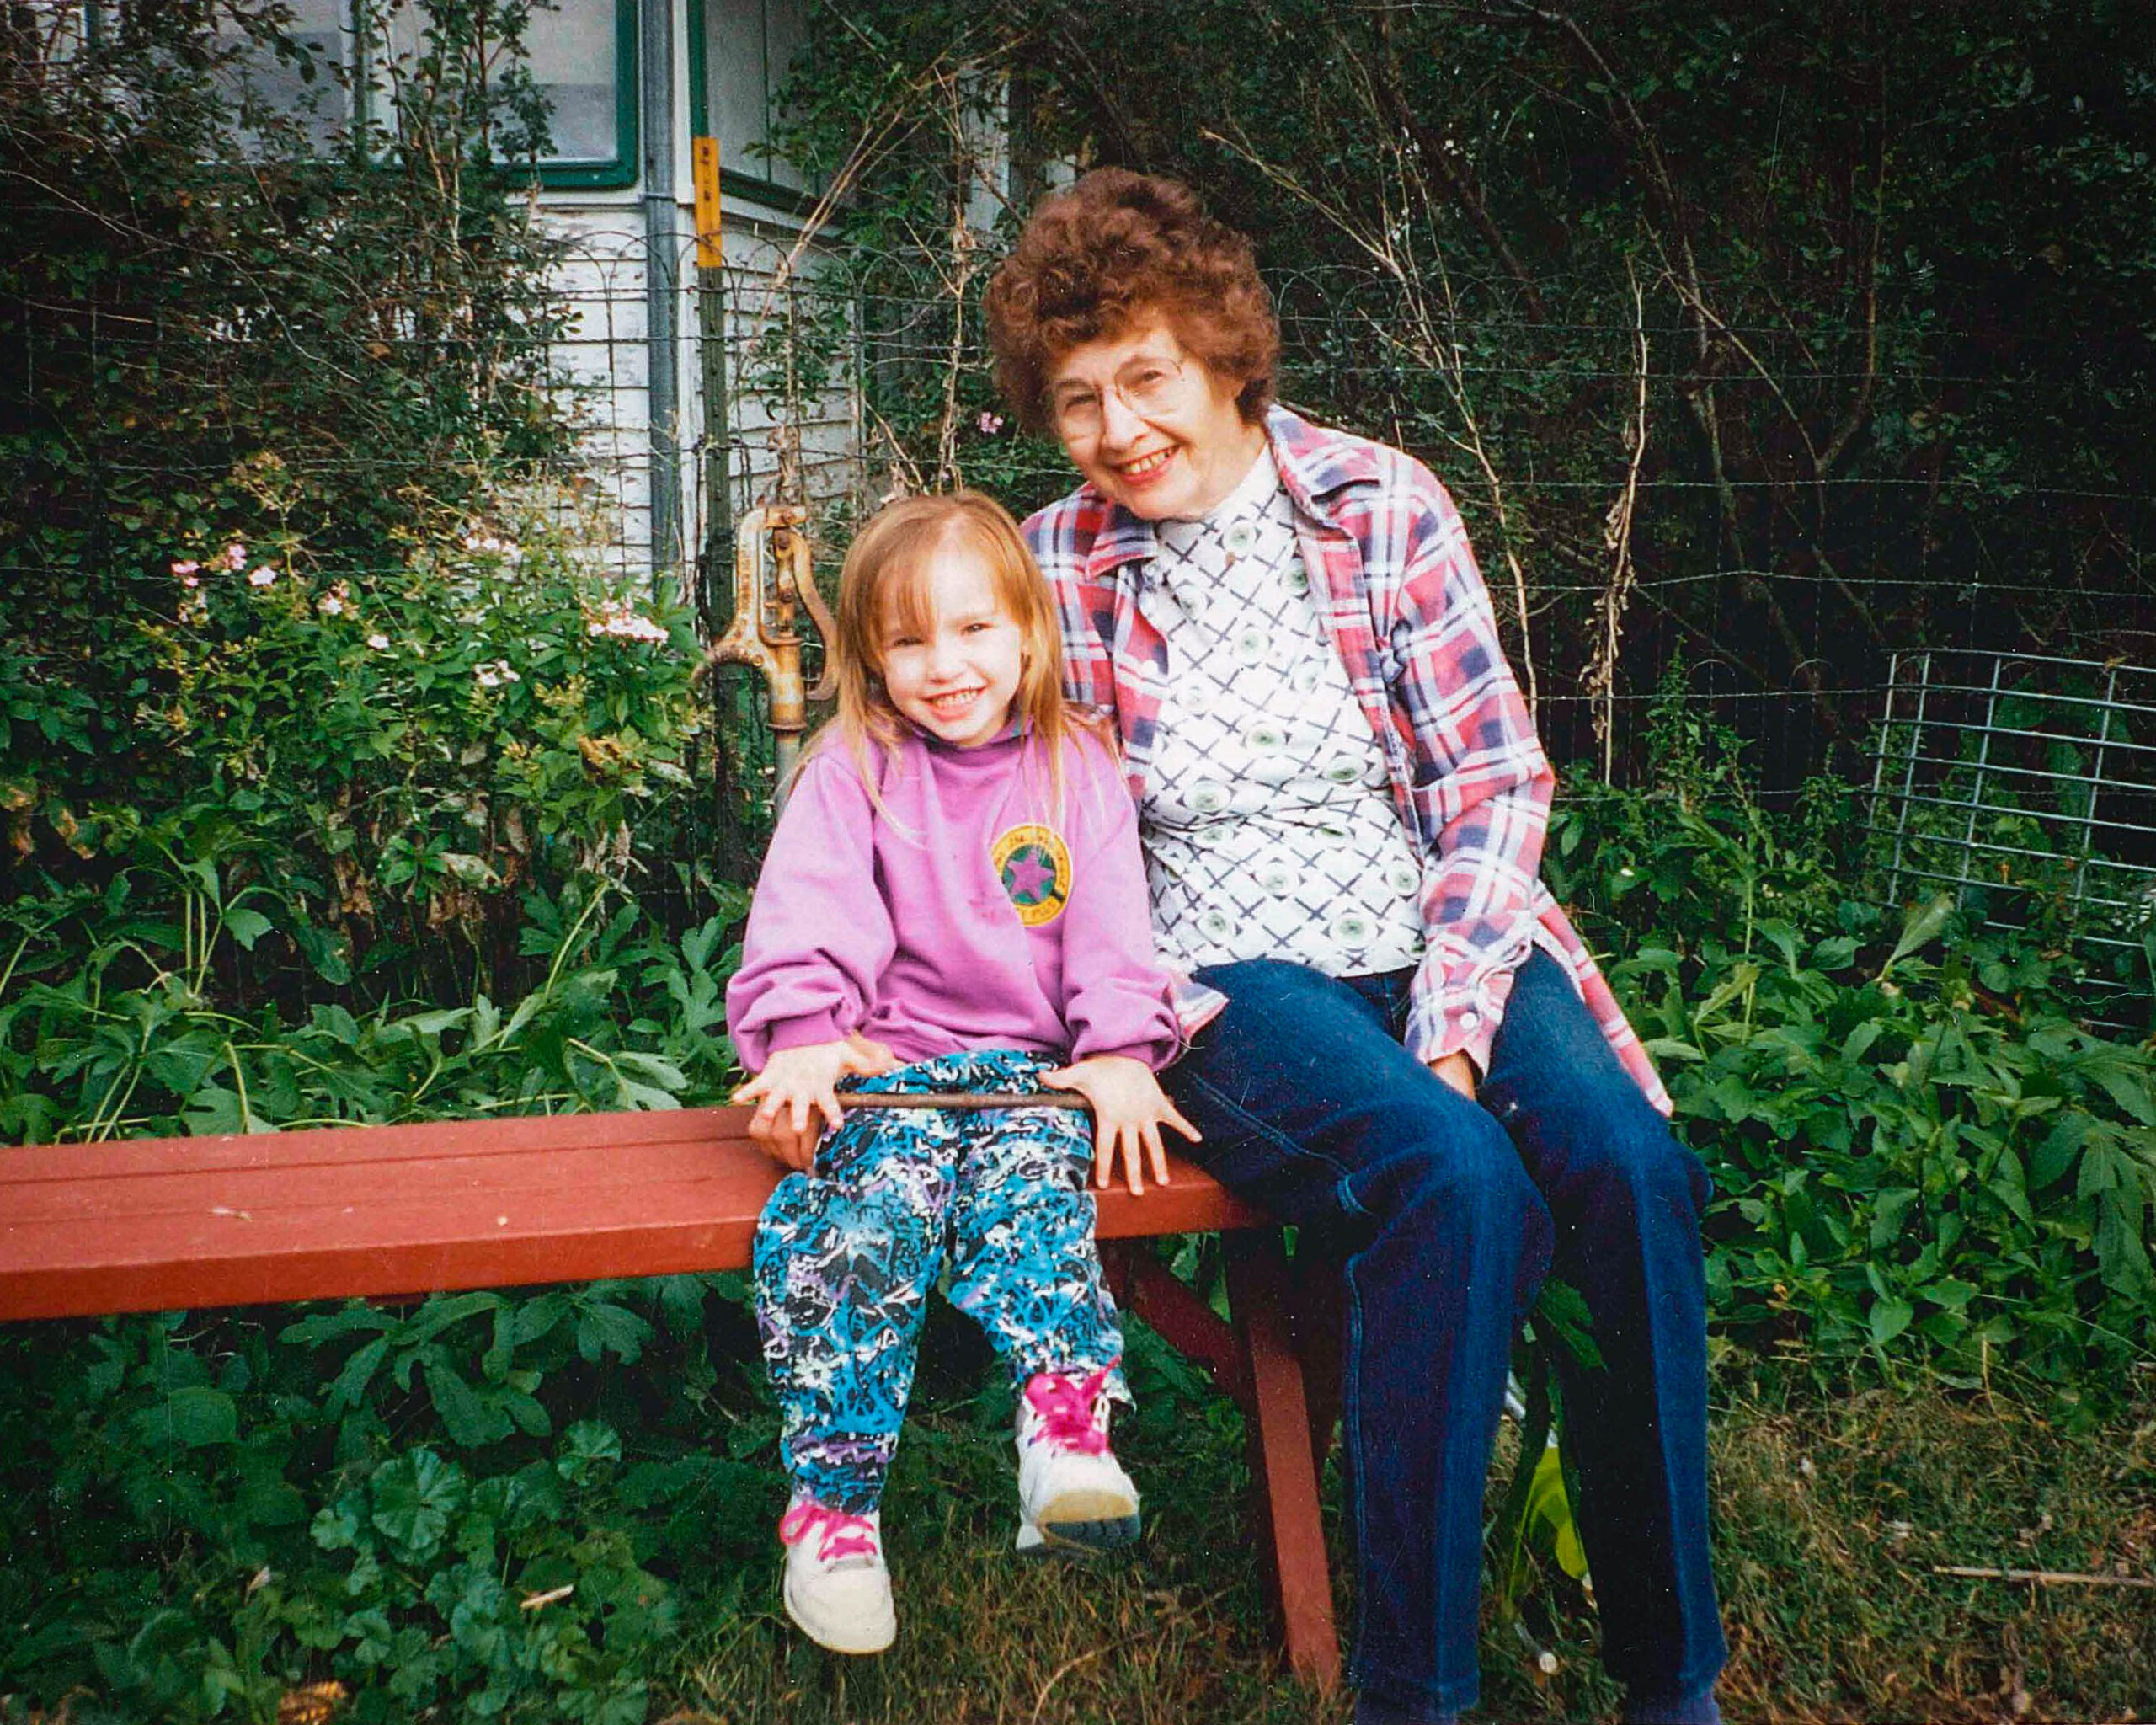 Leona Ihde poses with a child in her Beaver Crossing garden.